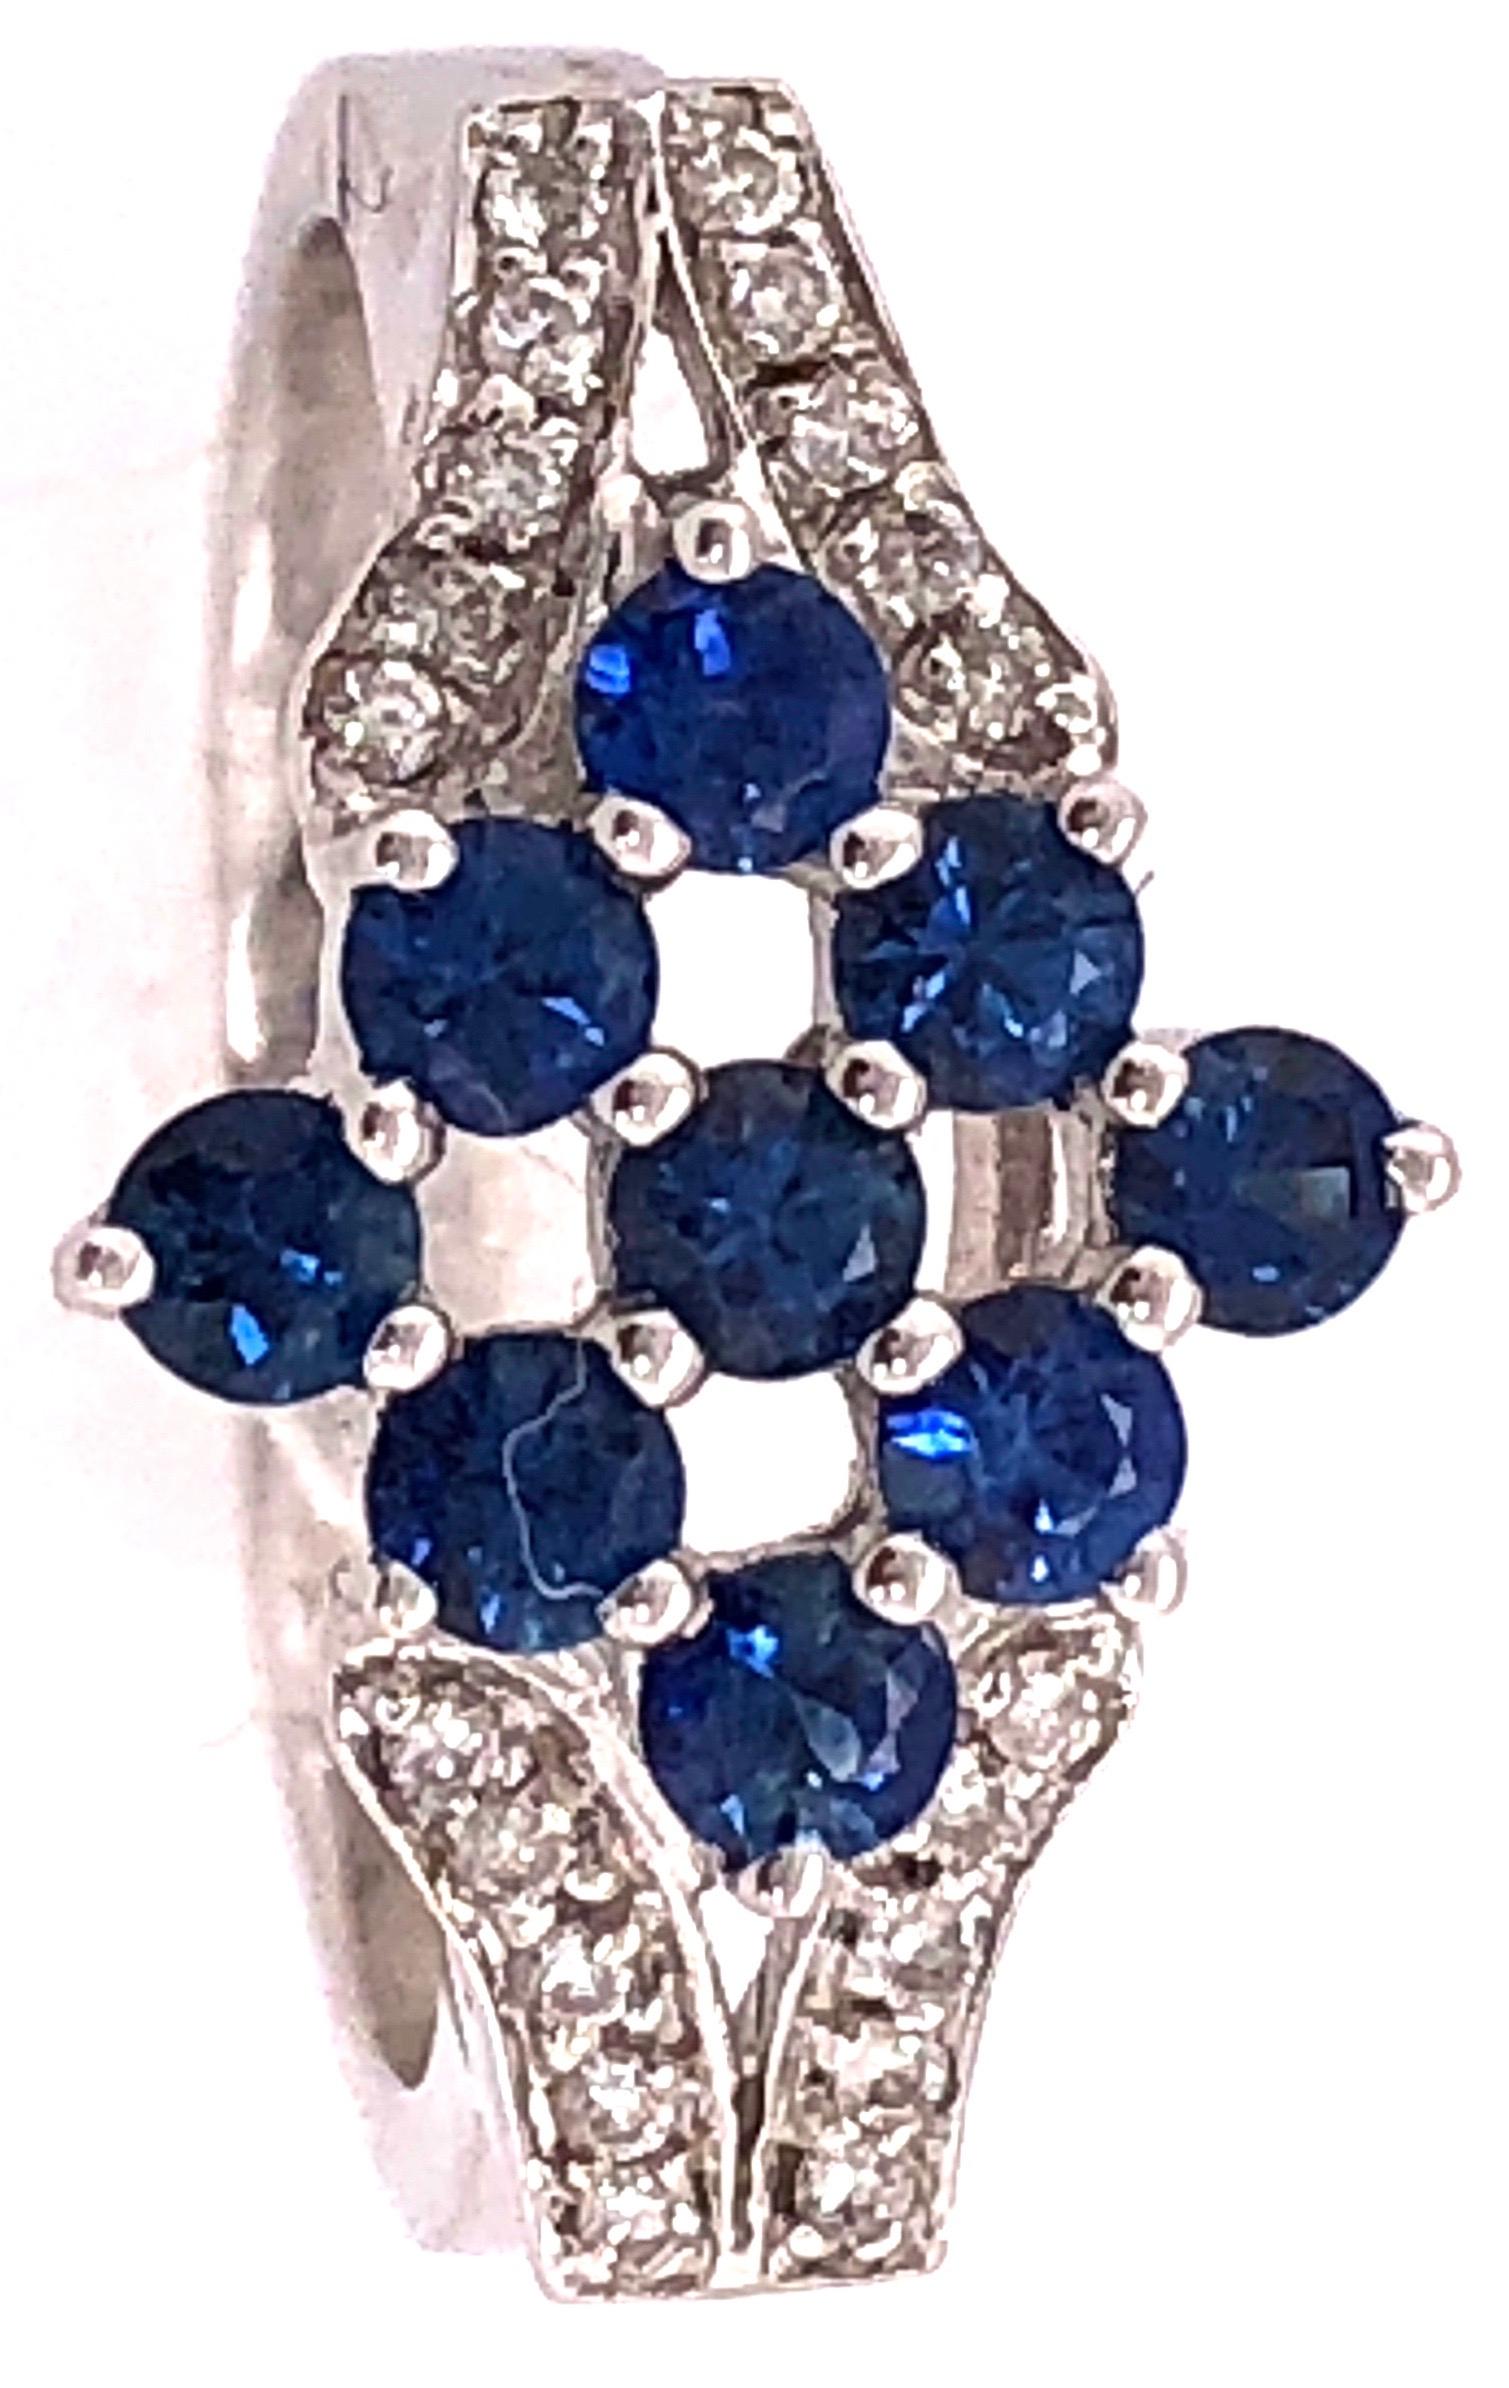 18 Karat White Gold Sapphire Cluster Fashion Ring with Diamond Accents 
0.11 Total Diamond Weight.
Size 6.5
5.26 grams total weight. 